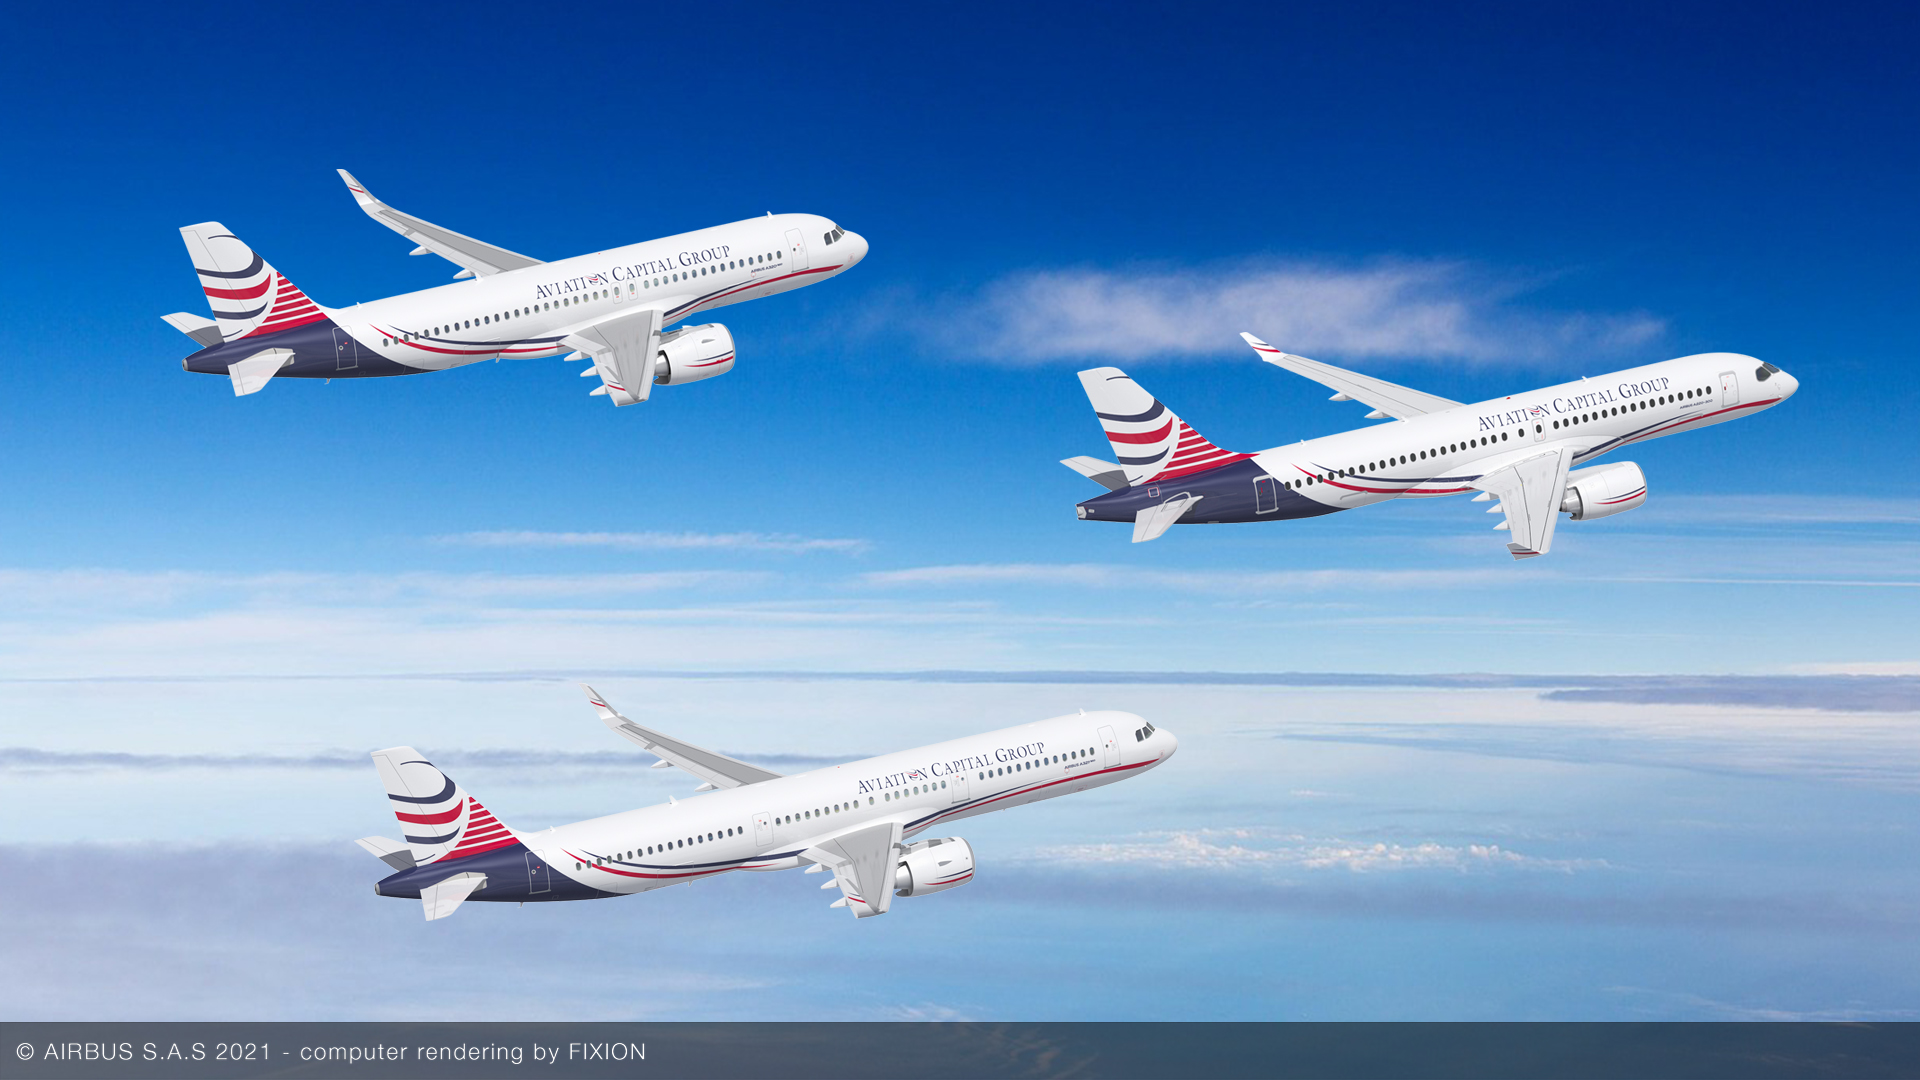 Aviation Capital Group commits to 20 A220s and 40 A320neo aircraft